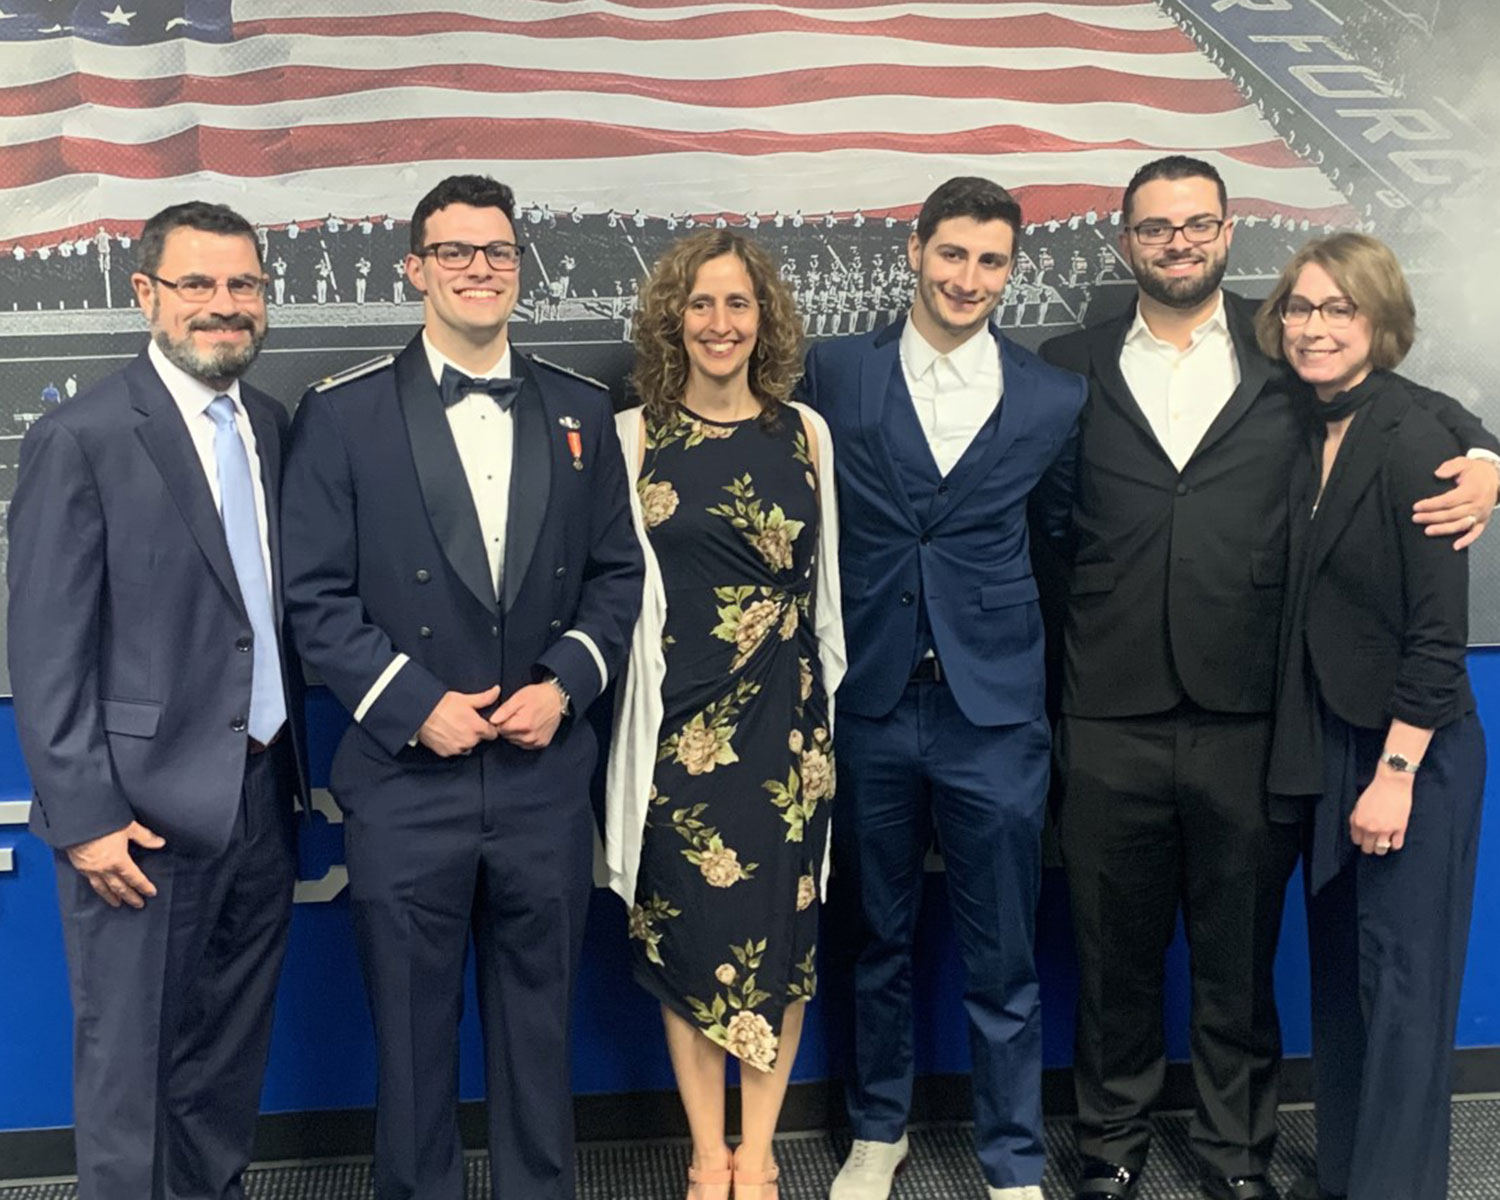 Joshua Henriques (second from left) with his family at his commissioning as a 2LT in the USAF.